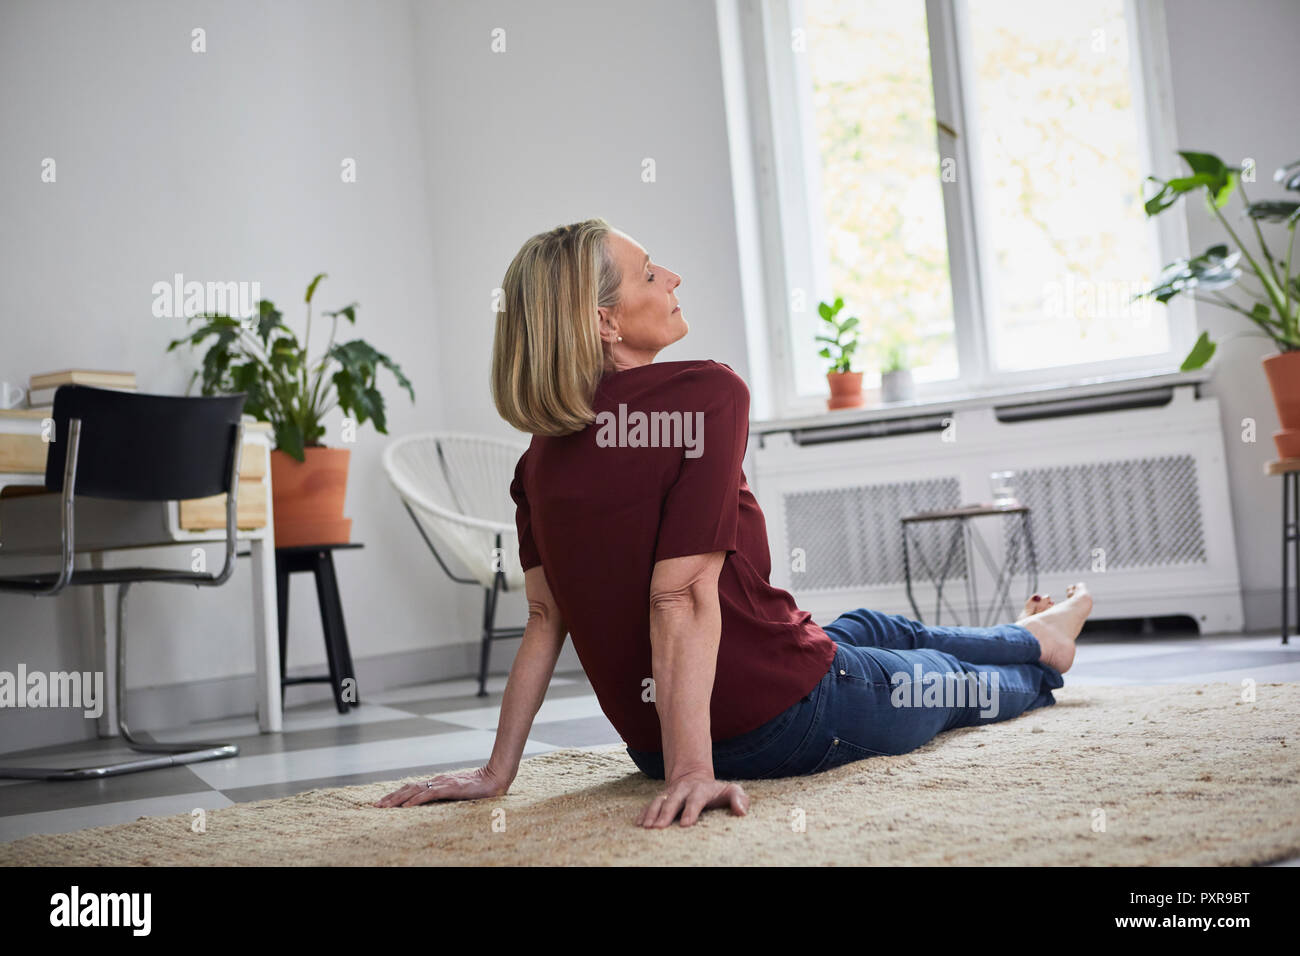 Relaxed mature woman sitting on the floor at home Stock Photo